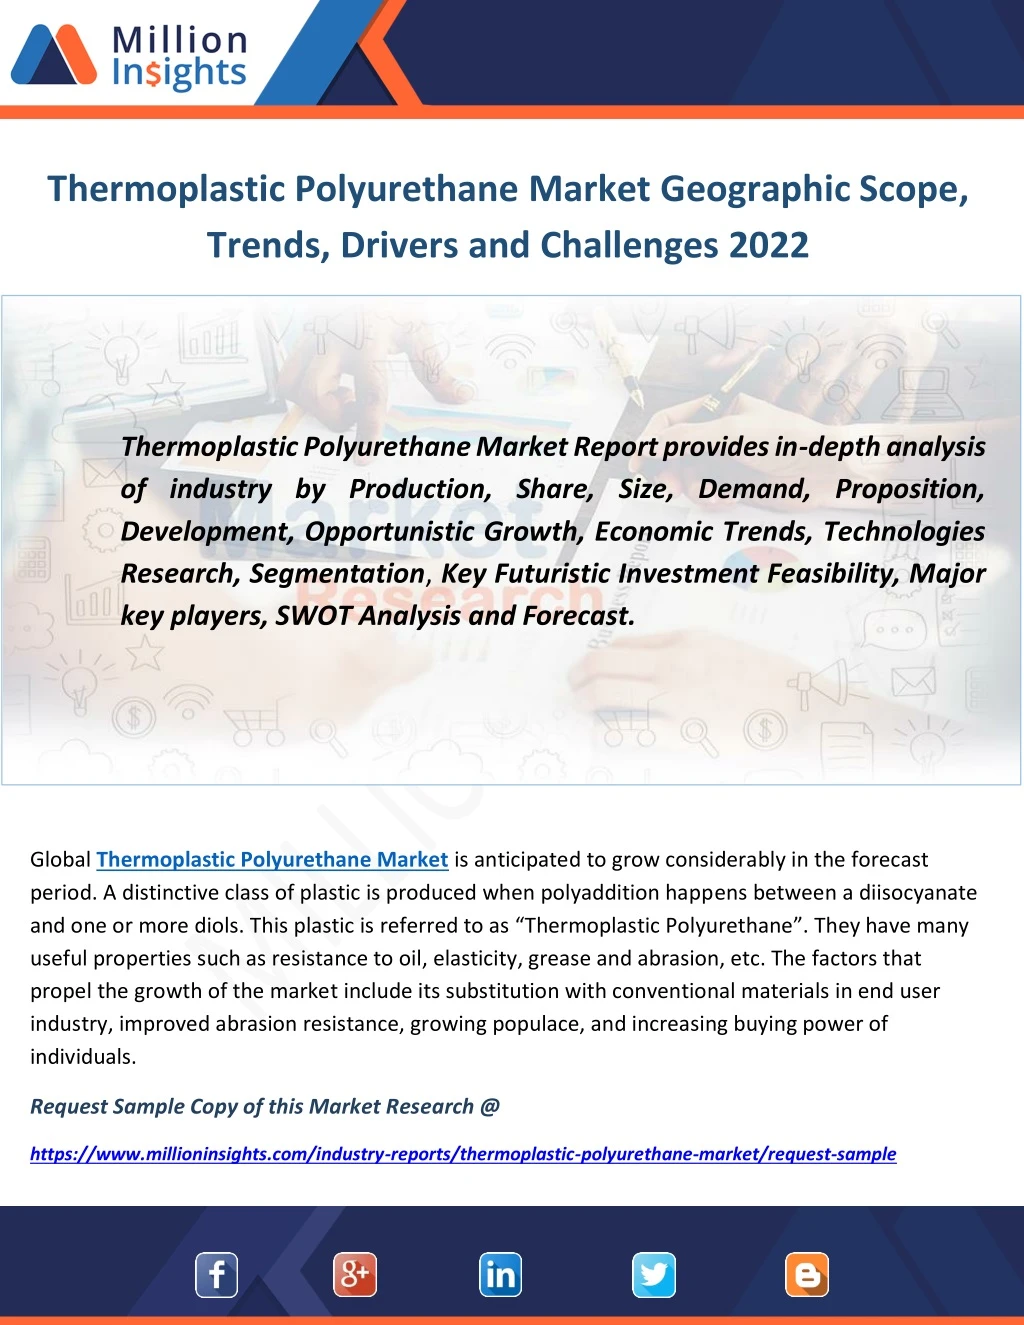 What is Thermoplastic Polyurethane?